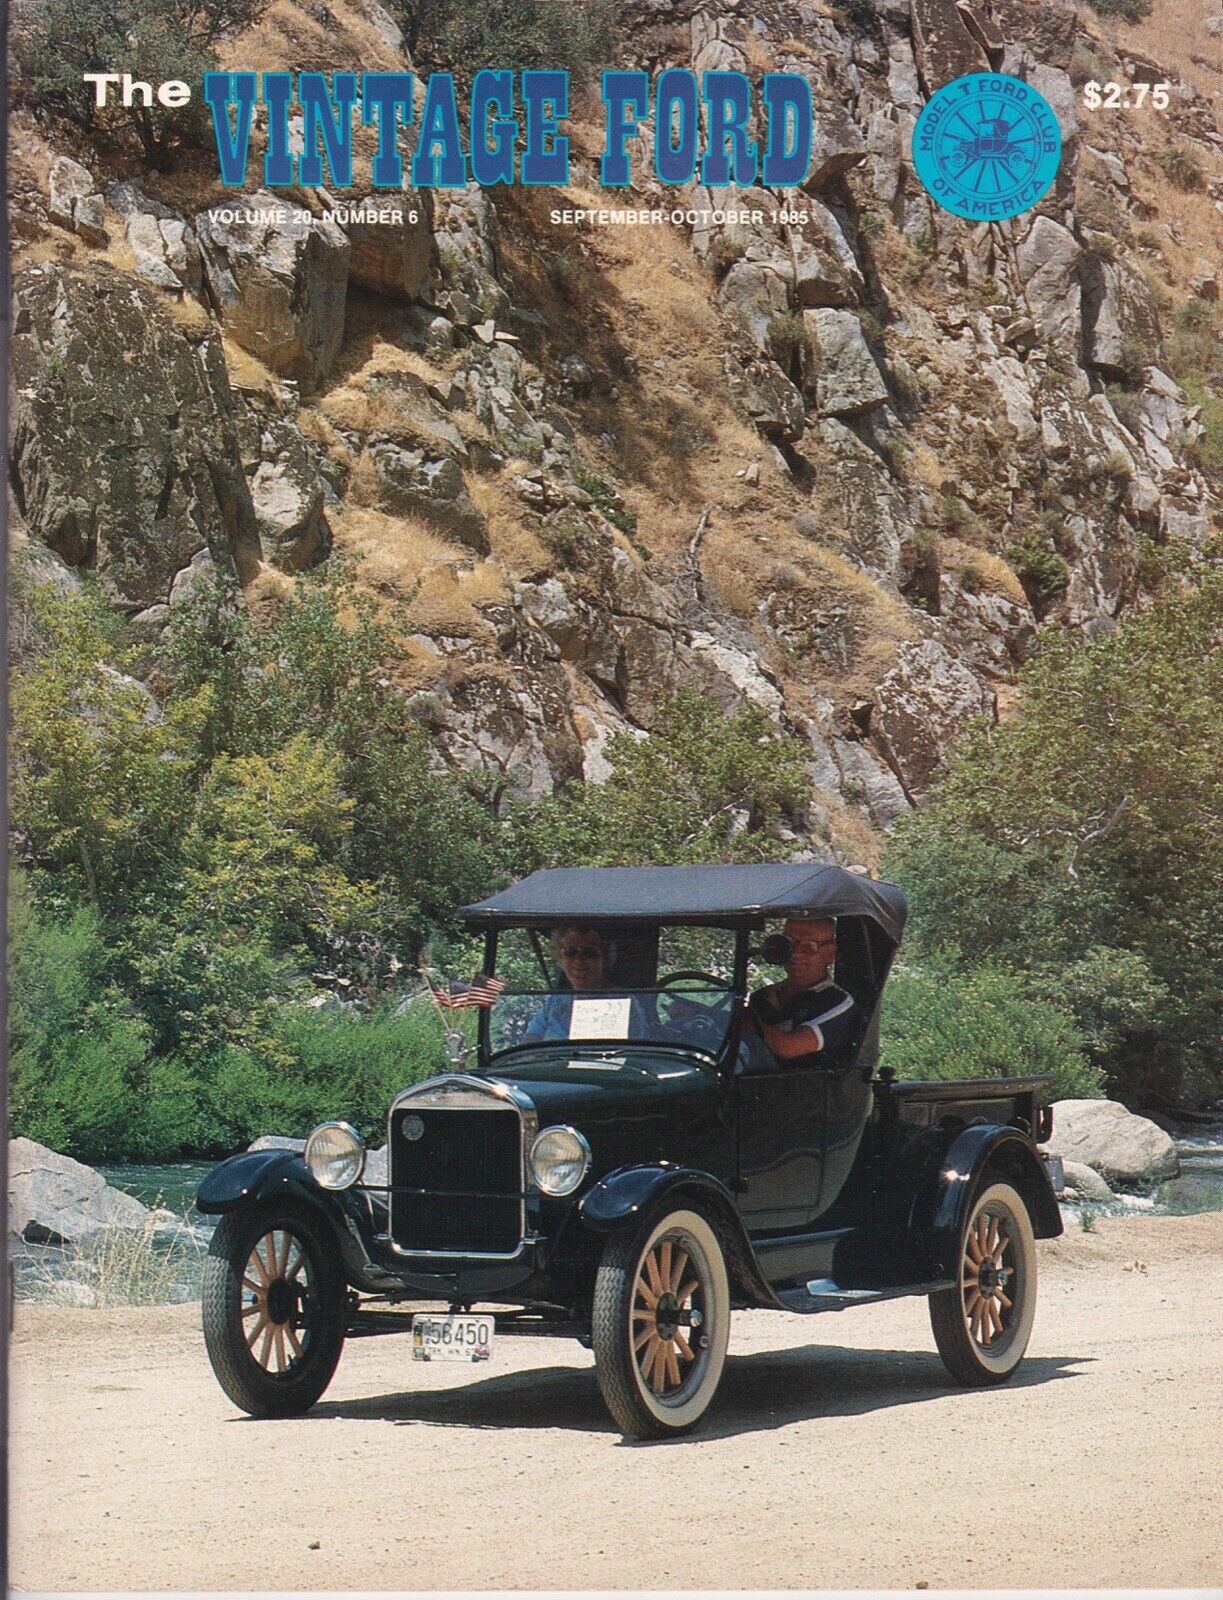 1926 ROADSTER-PICKUP - VINTAGE FORD MAGAZINE 1985 - THE MODEL CLUB AMERICA